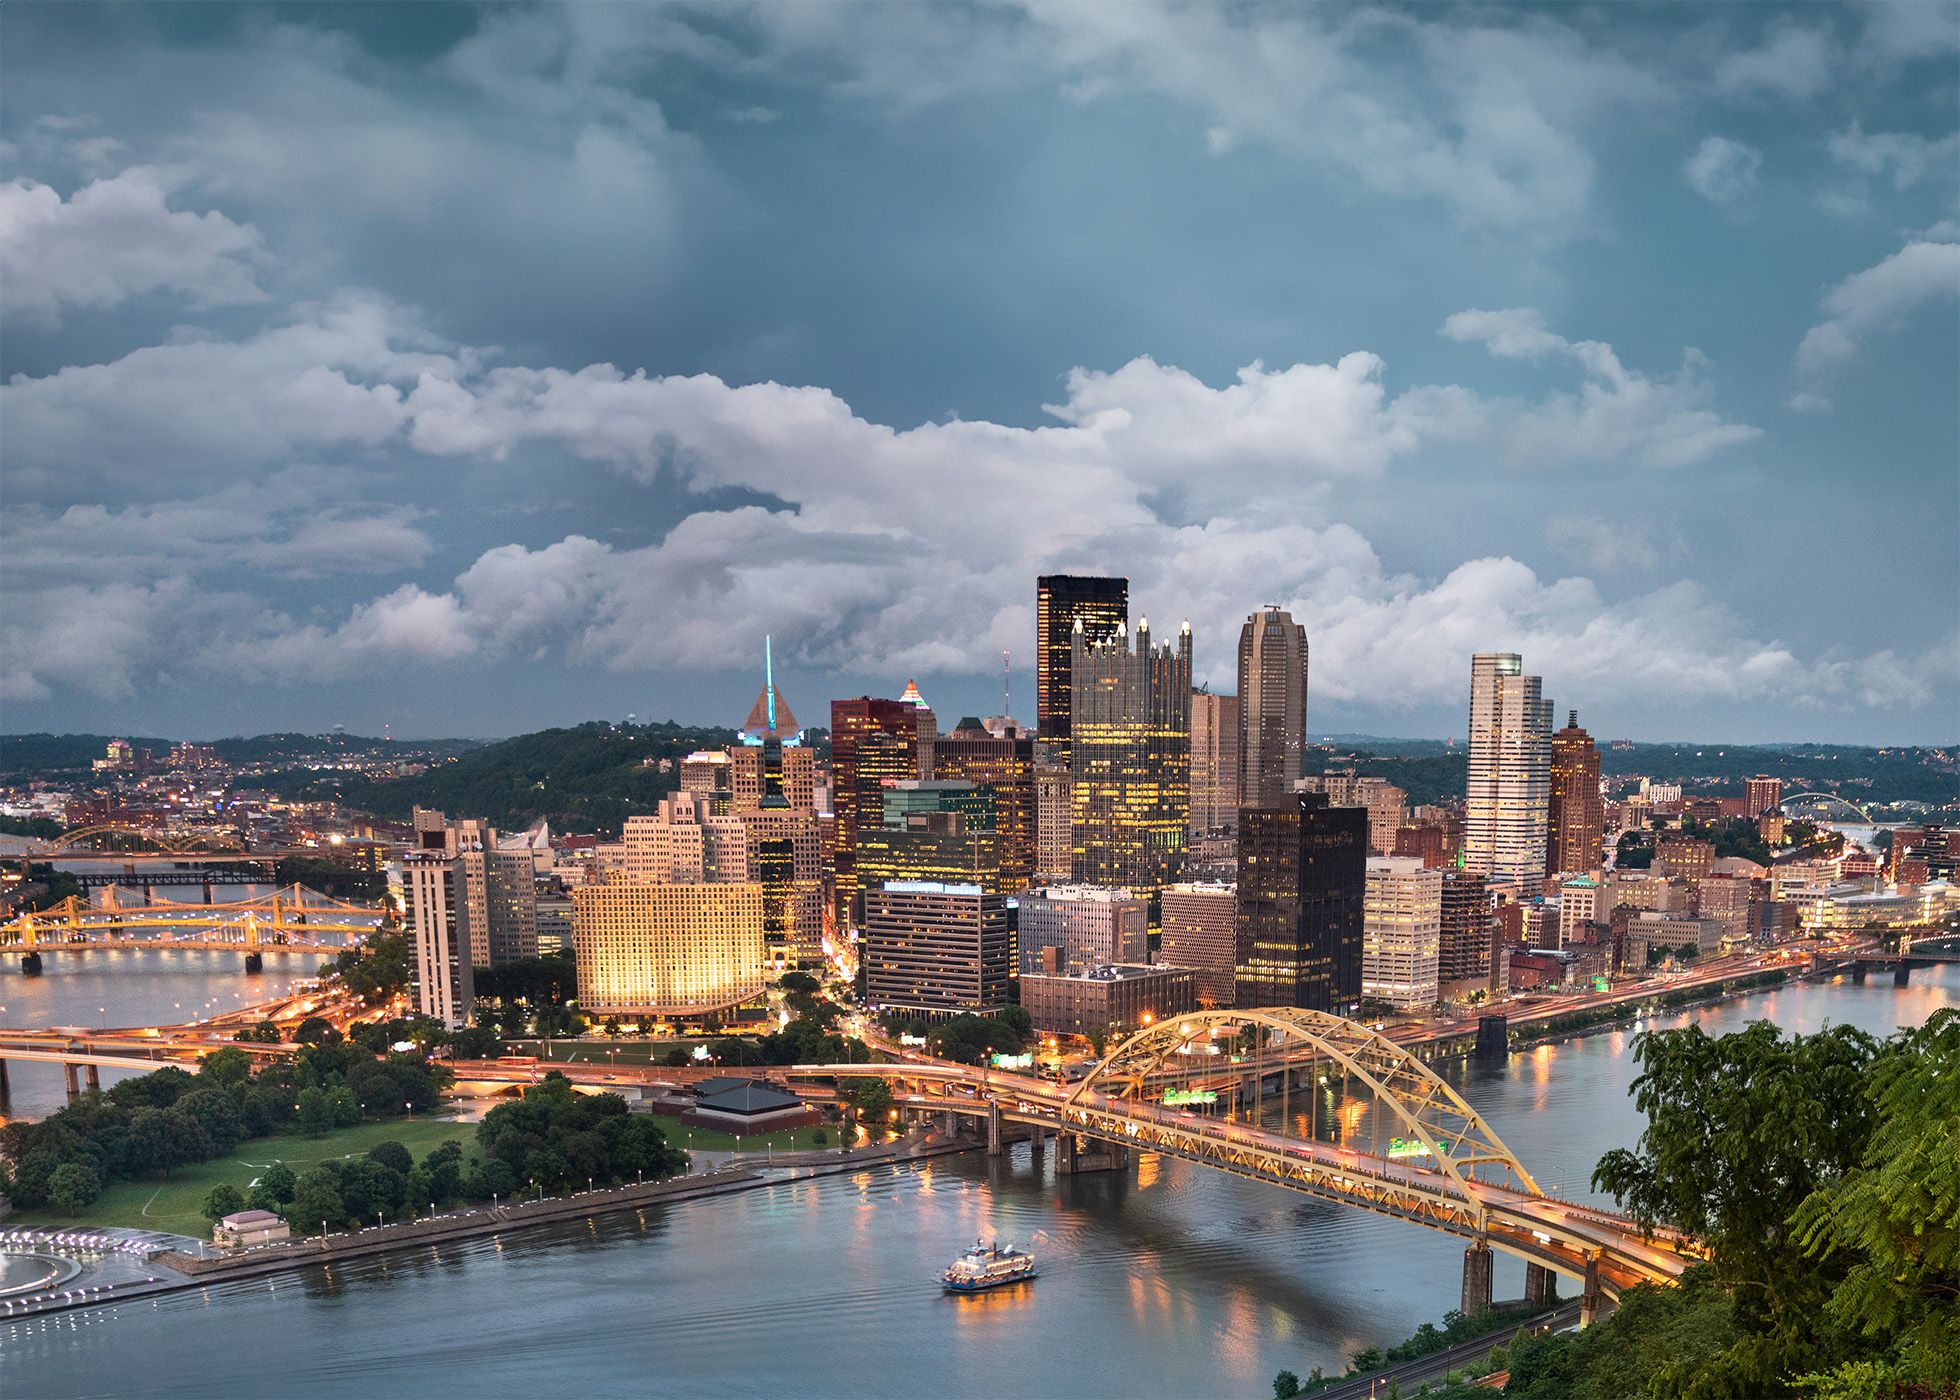 A picture of Pittsburgh, PA